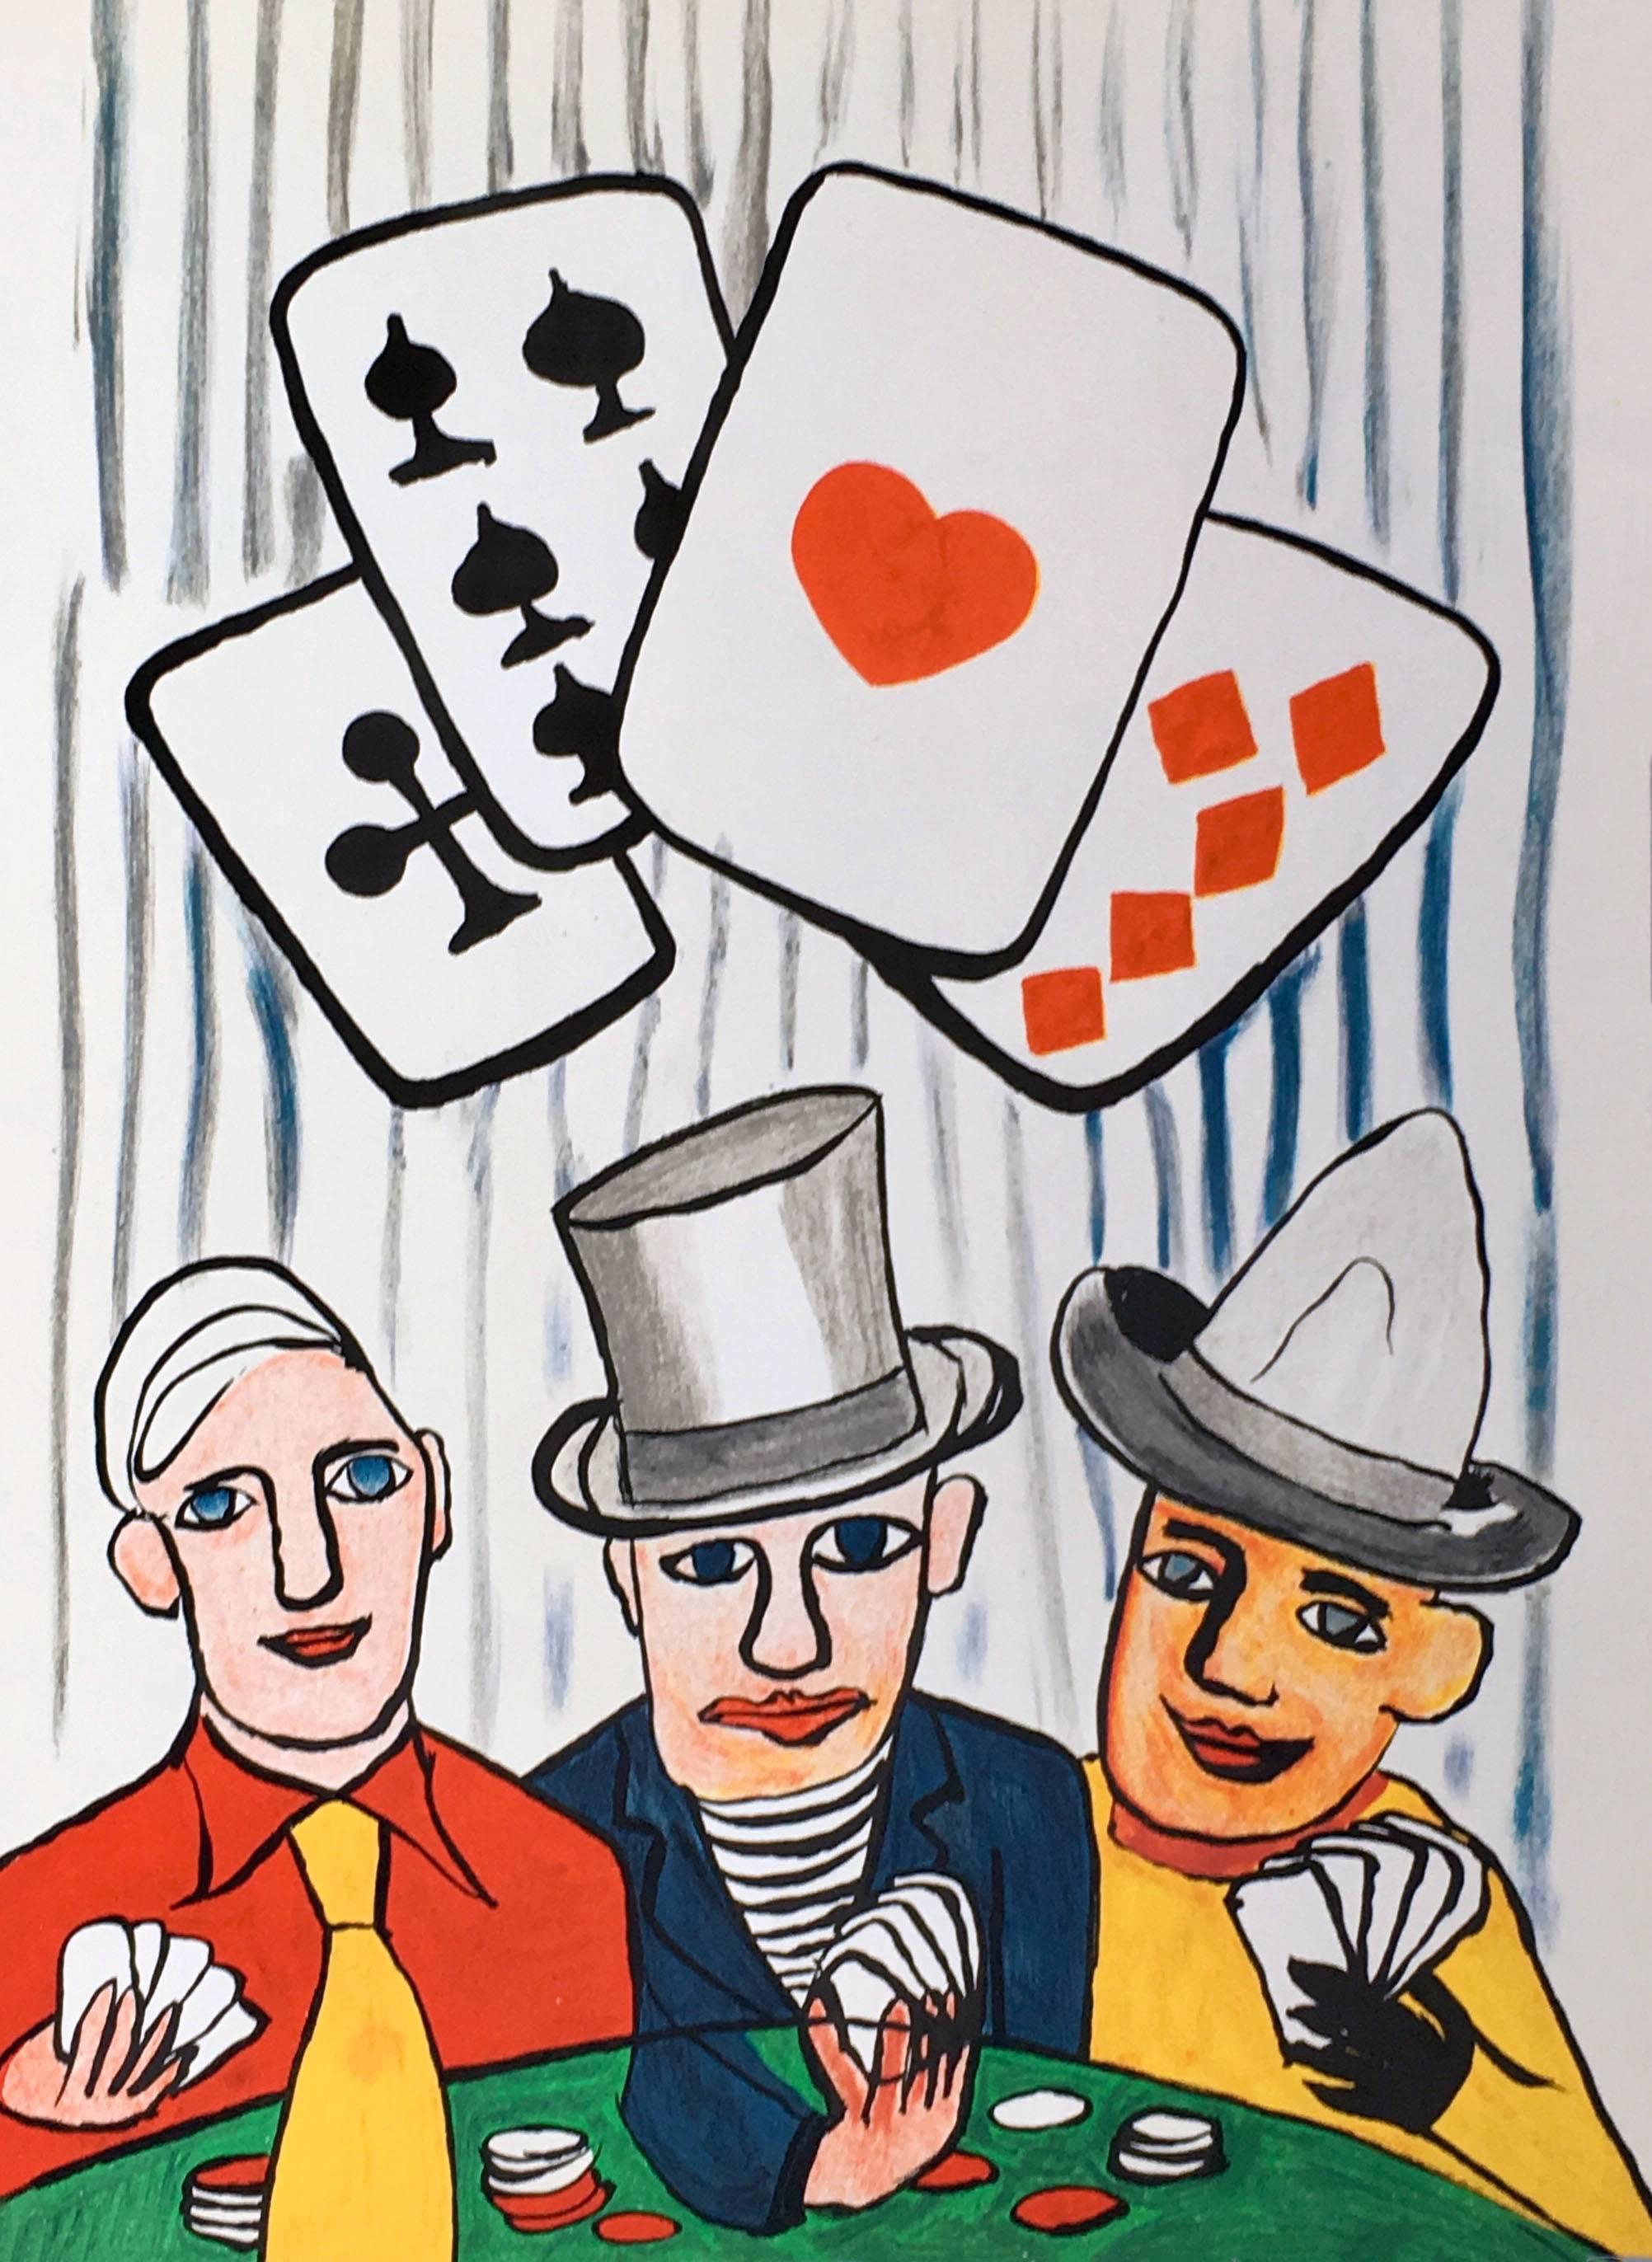 Alexander Calder Card Players Lithograph 1975:

Lithograph in colors; 11 x 15 inches.
Very good overall vintage condition.
Unsigned from an edition of unknown.
Portfolio: Derrière le miroir Published by: Galerie Maeght, Paris, 1973.

Derrière le